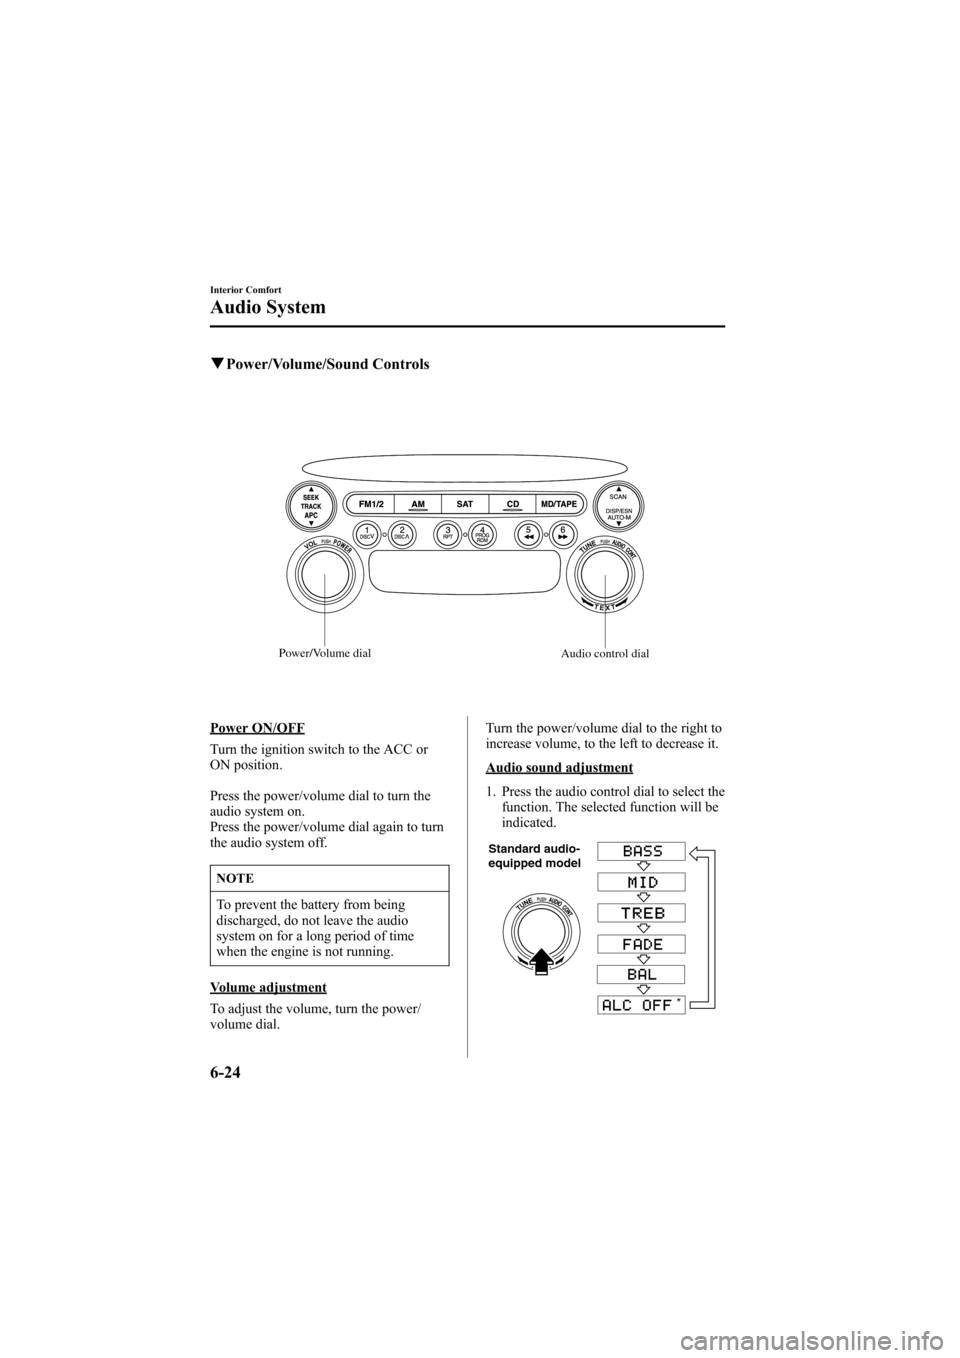 MAZDA MODEL 6 2005   (in English) User Guide Black plate (196,1)
qPower/Volume/Sound Controls
Power/Volume dial
Audio control dial
Power ON/OFF
Turn the ignition switch to the ACC or
ON position.
Press the power/volume dial to turn the
audio sys